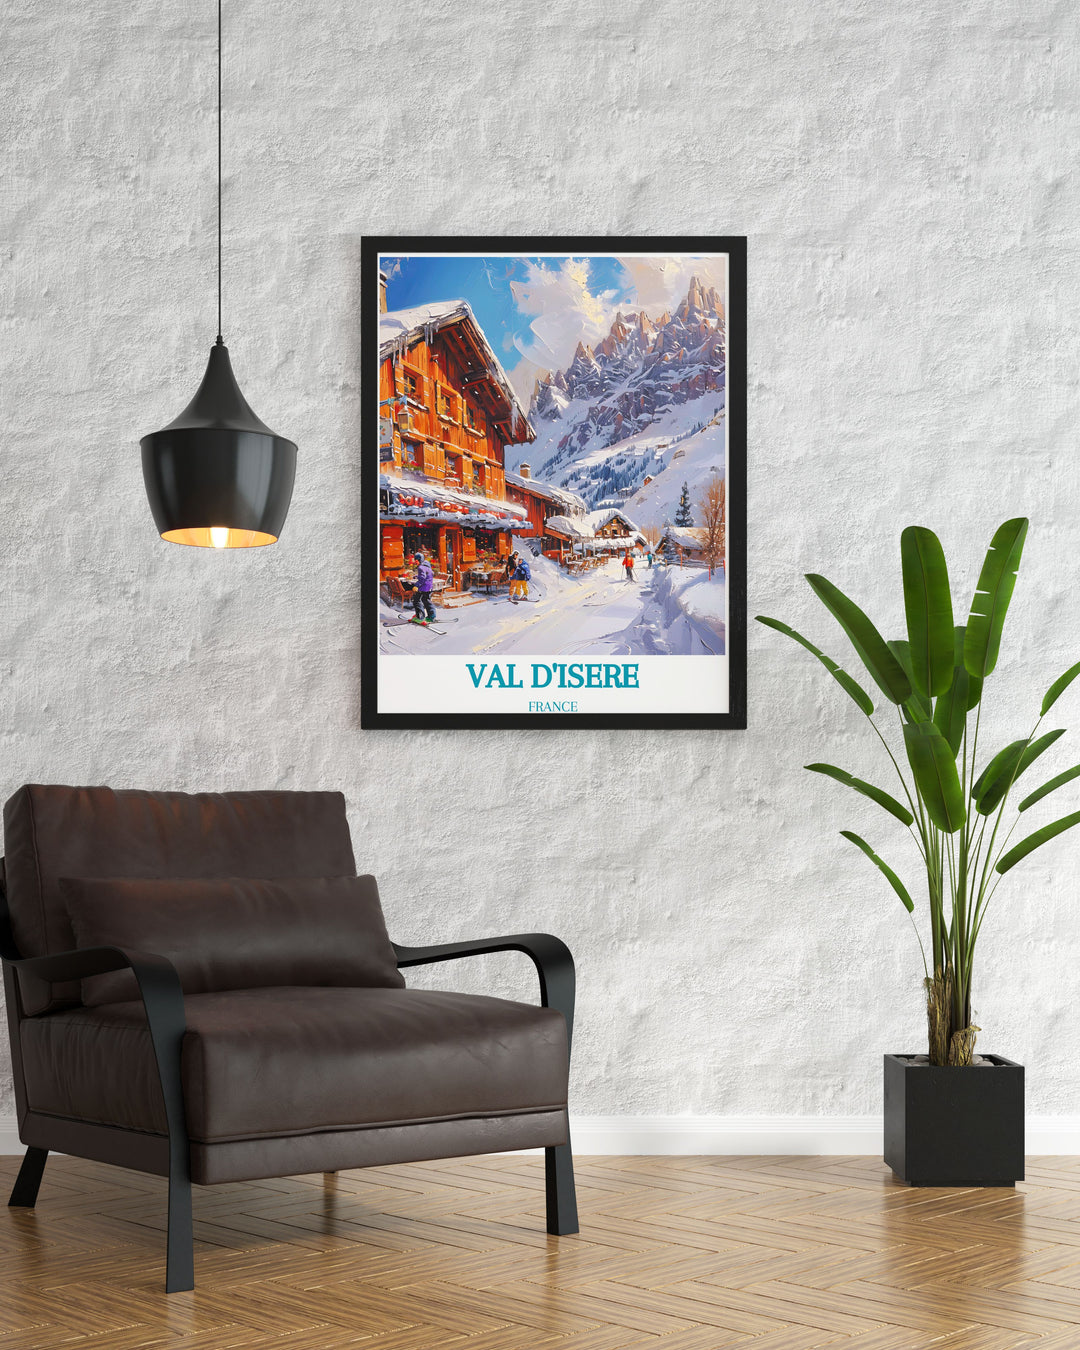 Revel in the adventurous spirit of Solaise in Val dIsere with this detailed art print, capturing the dynamic landscape and vibrant atmosphere of one of the French Alps most famous skiing destinations.